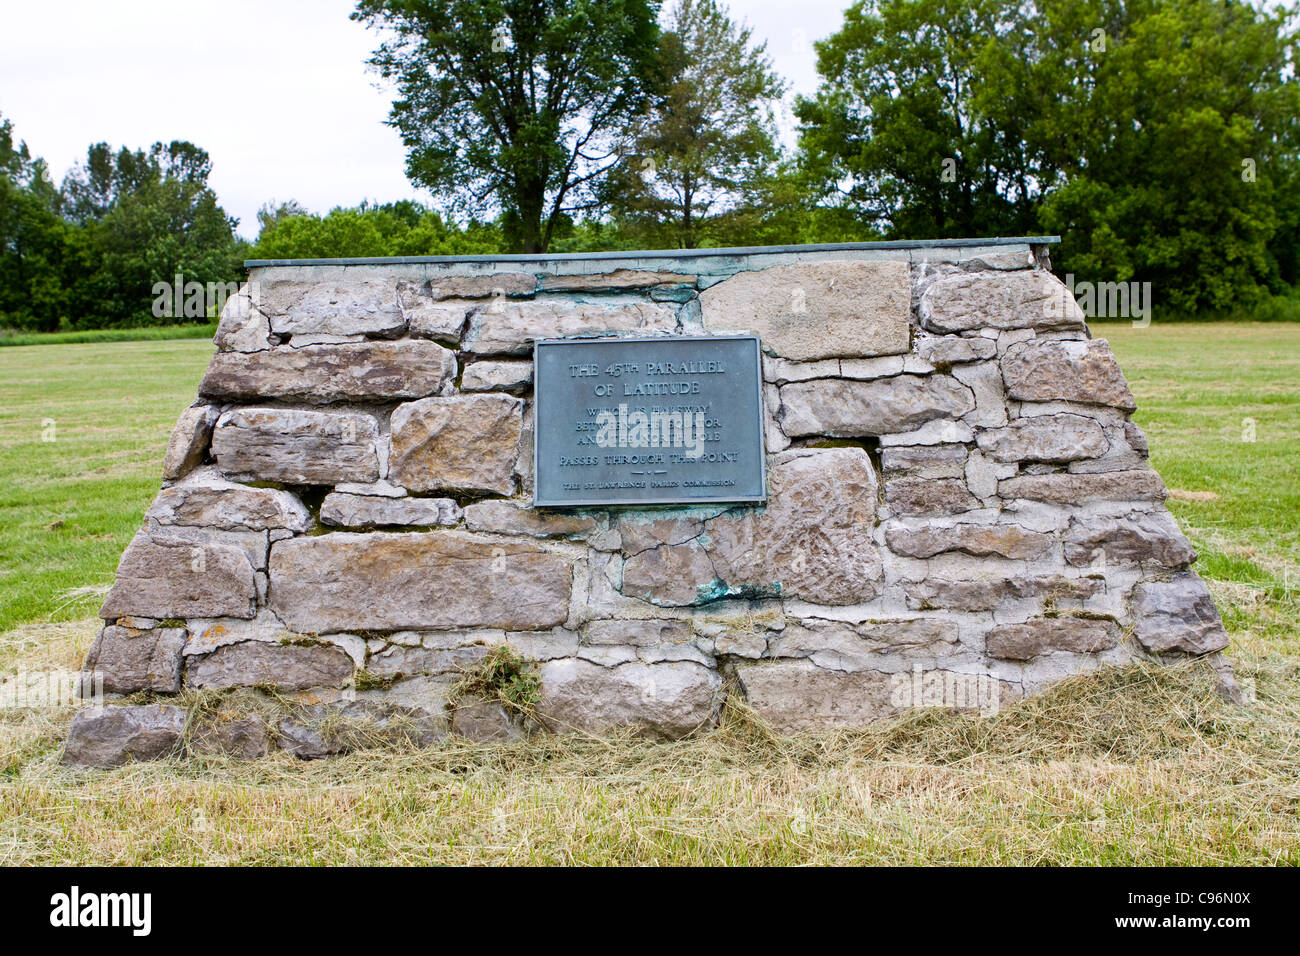 Monument depicting 45th parallel North that passes through Long Sault, Ontario, Canada. Stock Photo